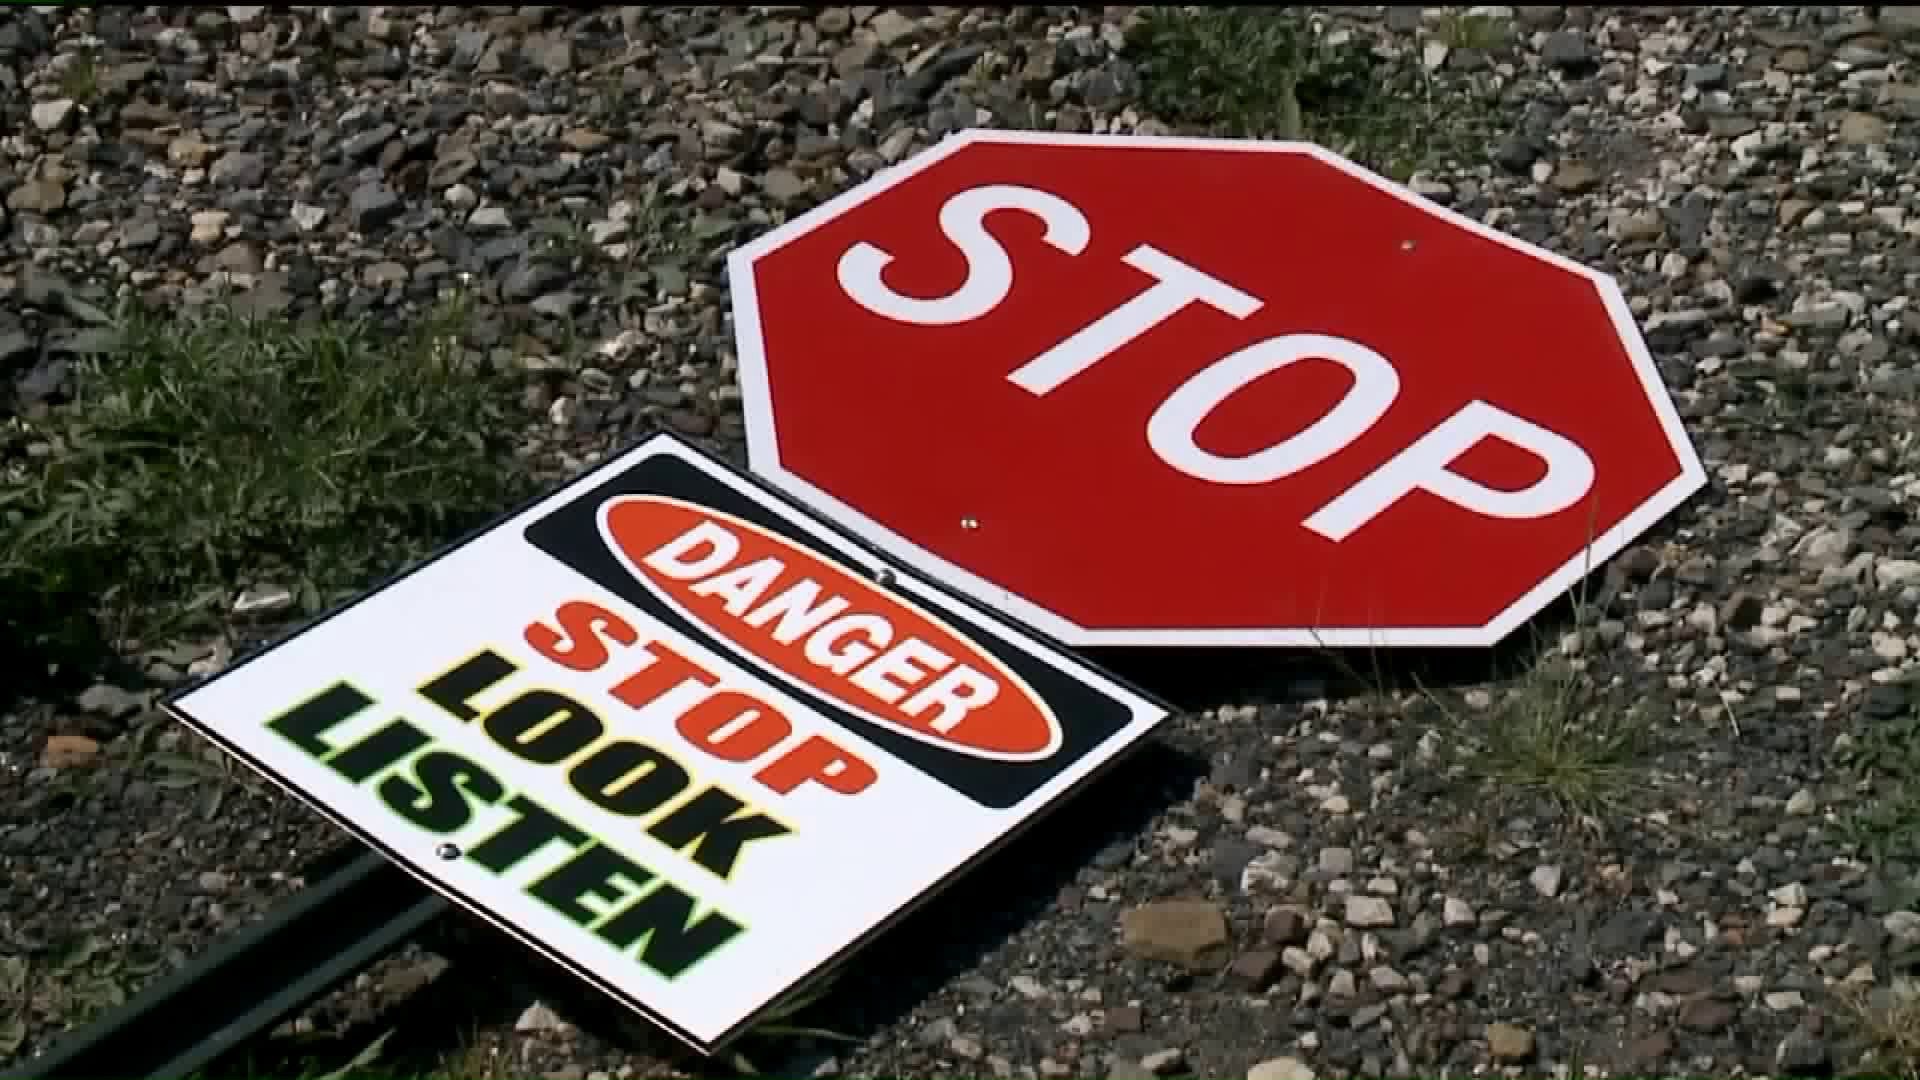 Calls for More Safety Features at Railroad Crossing After Crash